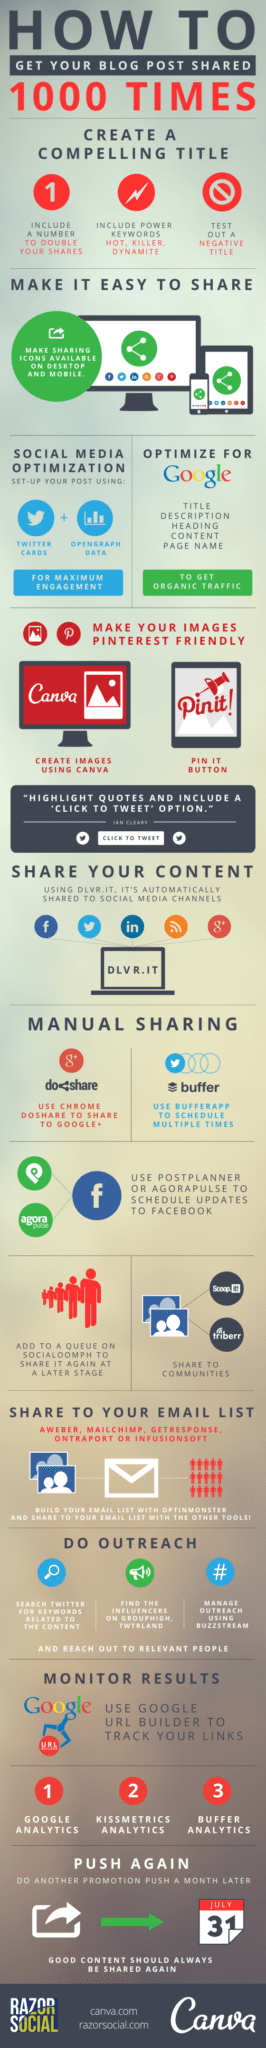 Get your blog post shared Infographic